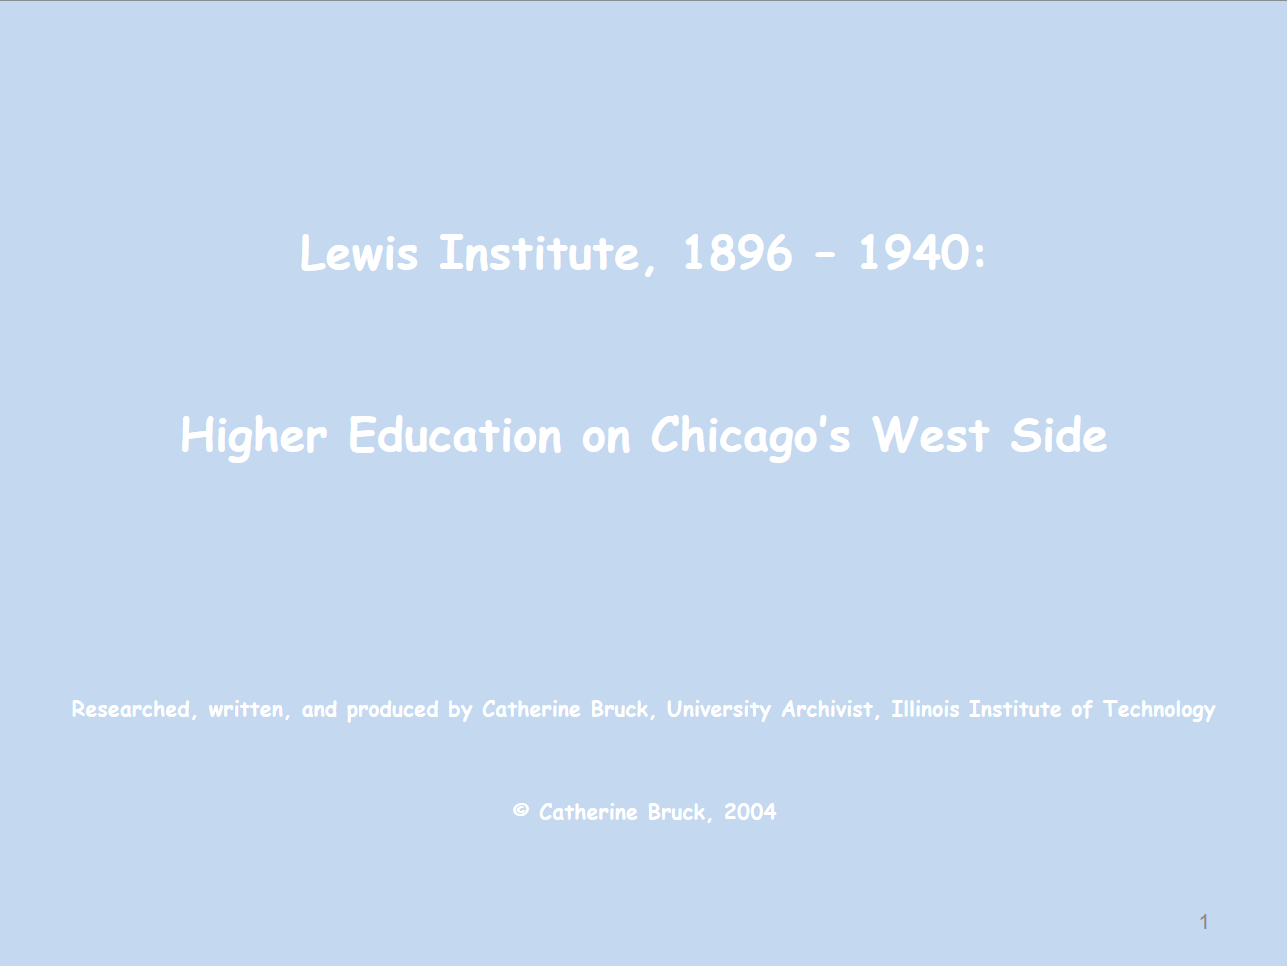 Lewis Institute, 1896-1940: Higher Education on Chicago's West Side